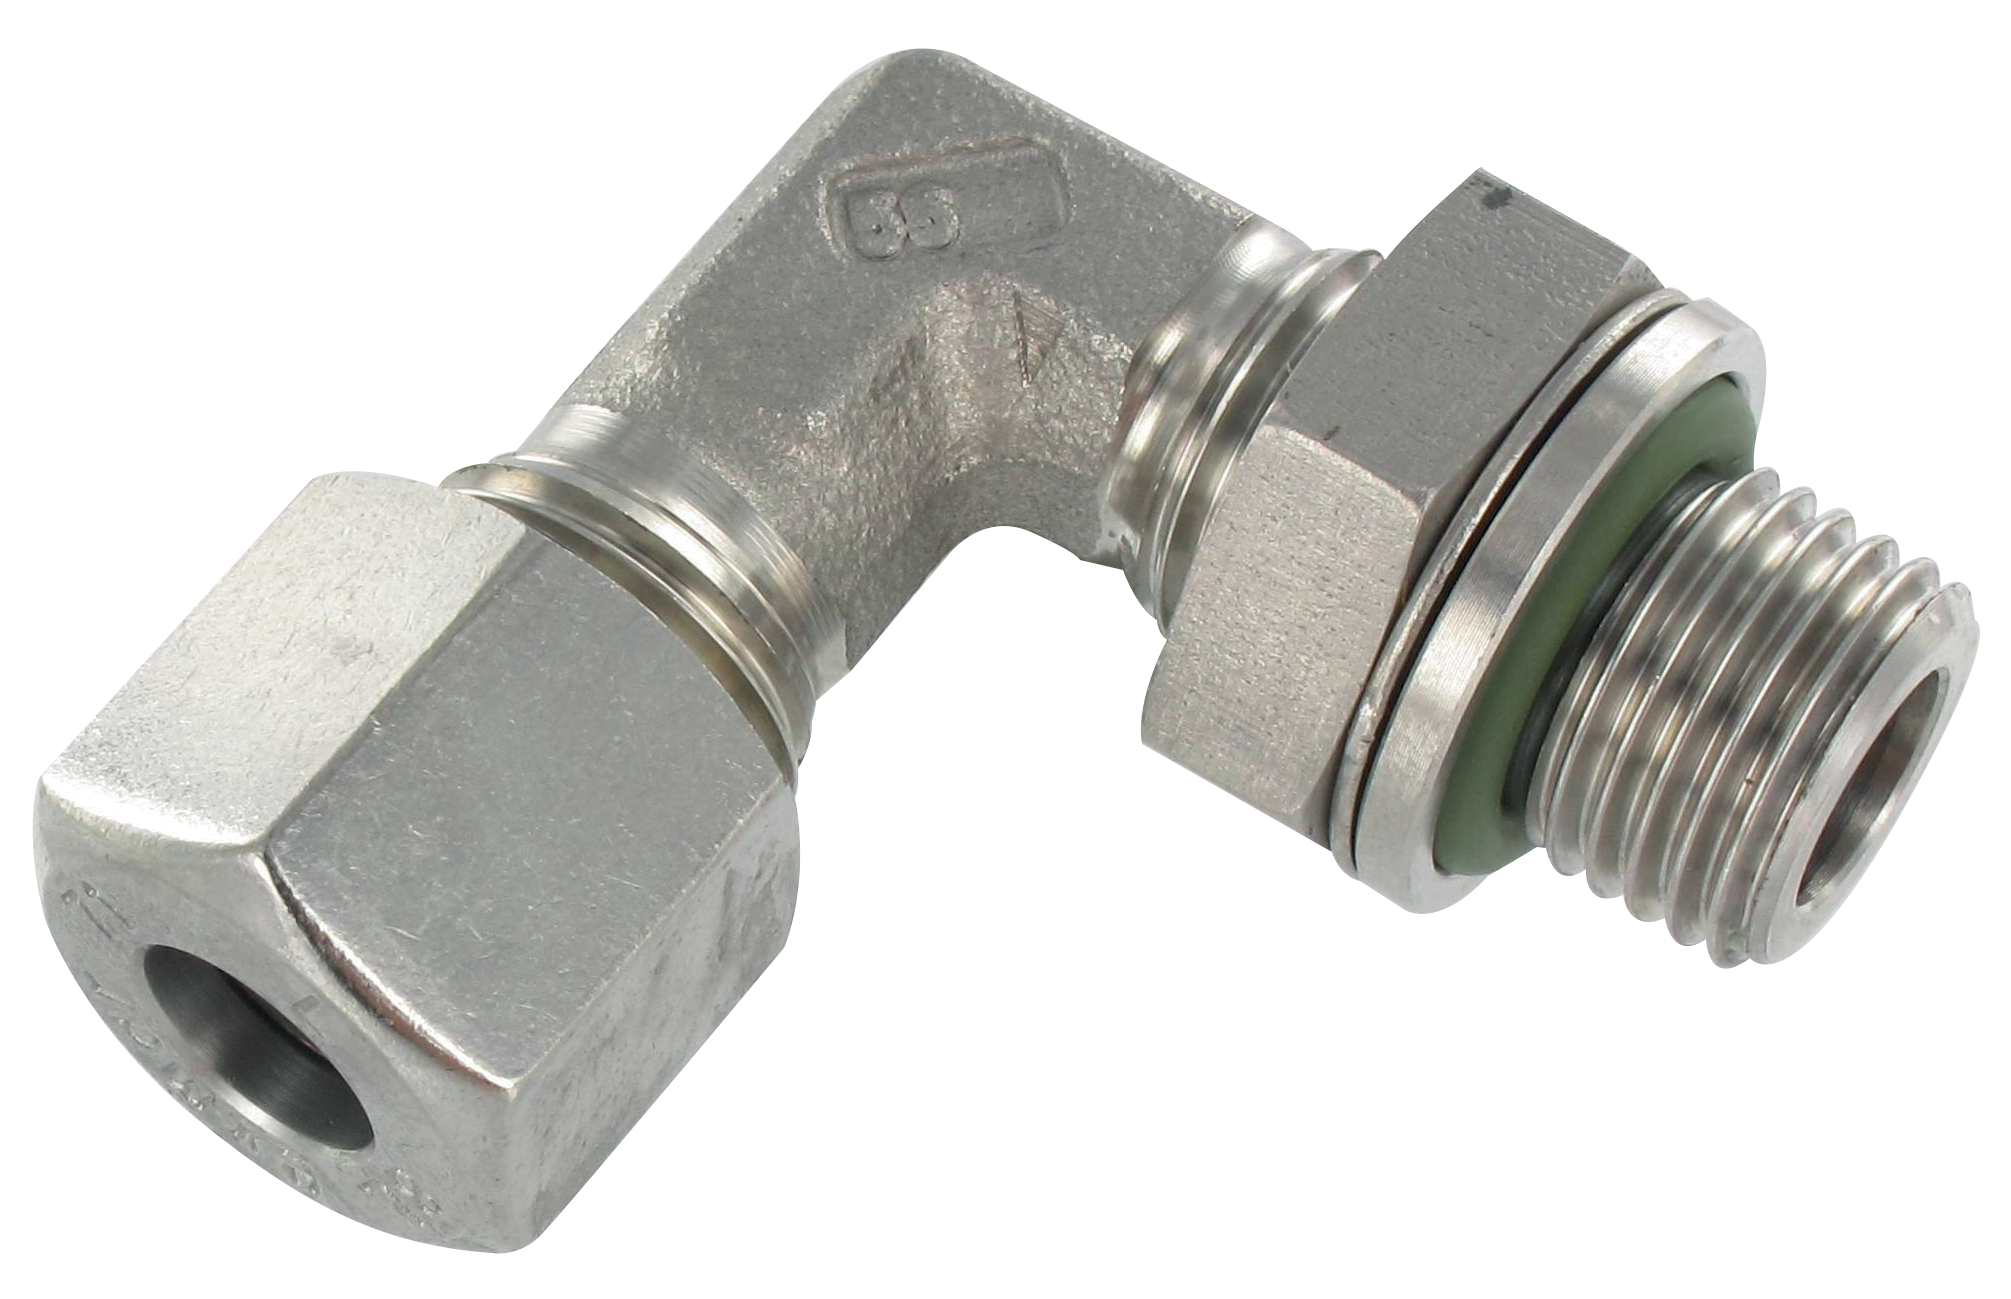 Universal elbow male swivel compression fittings with FKM seal mounted in stainless steel to DIN 2353